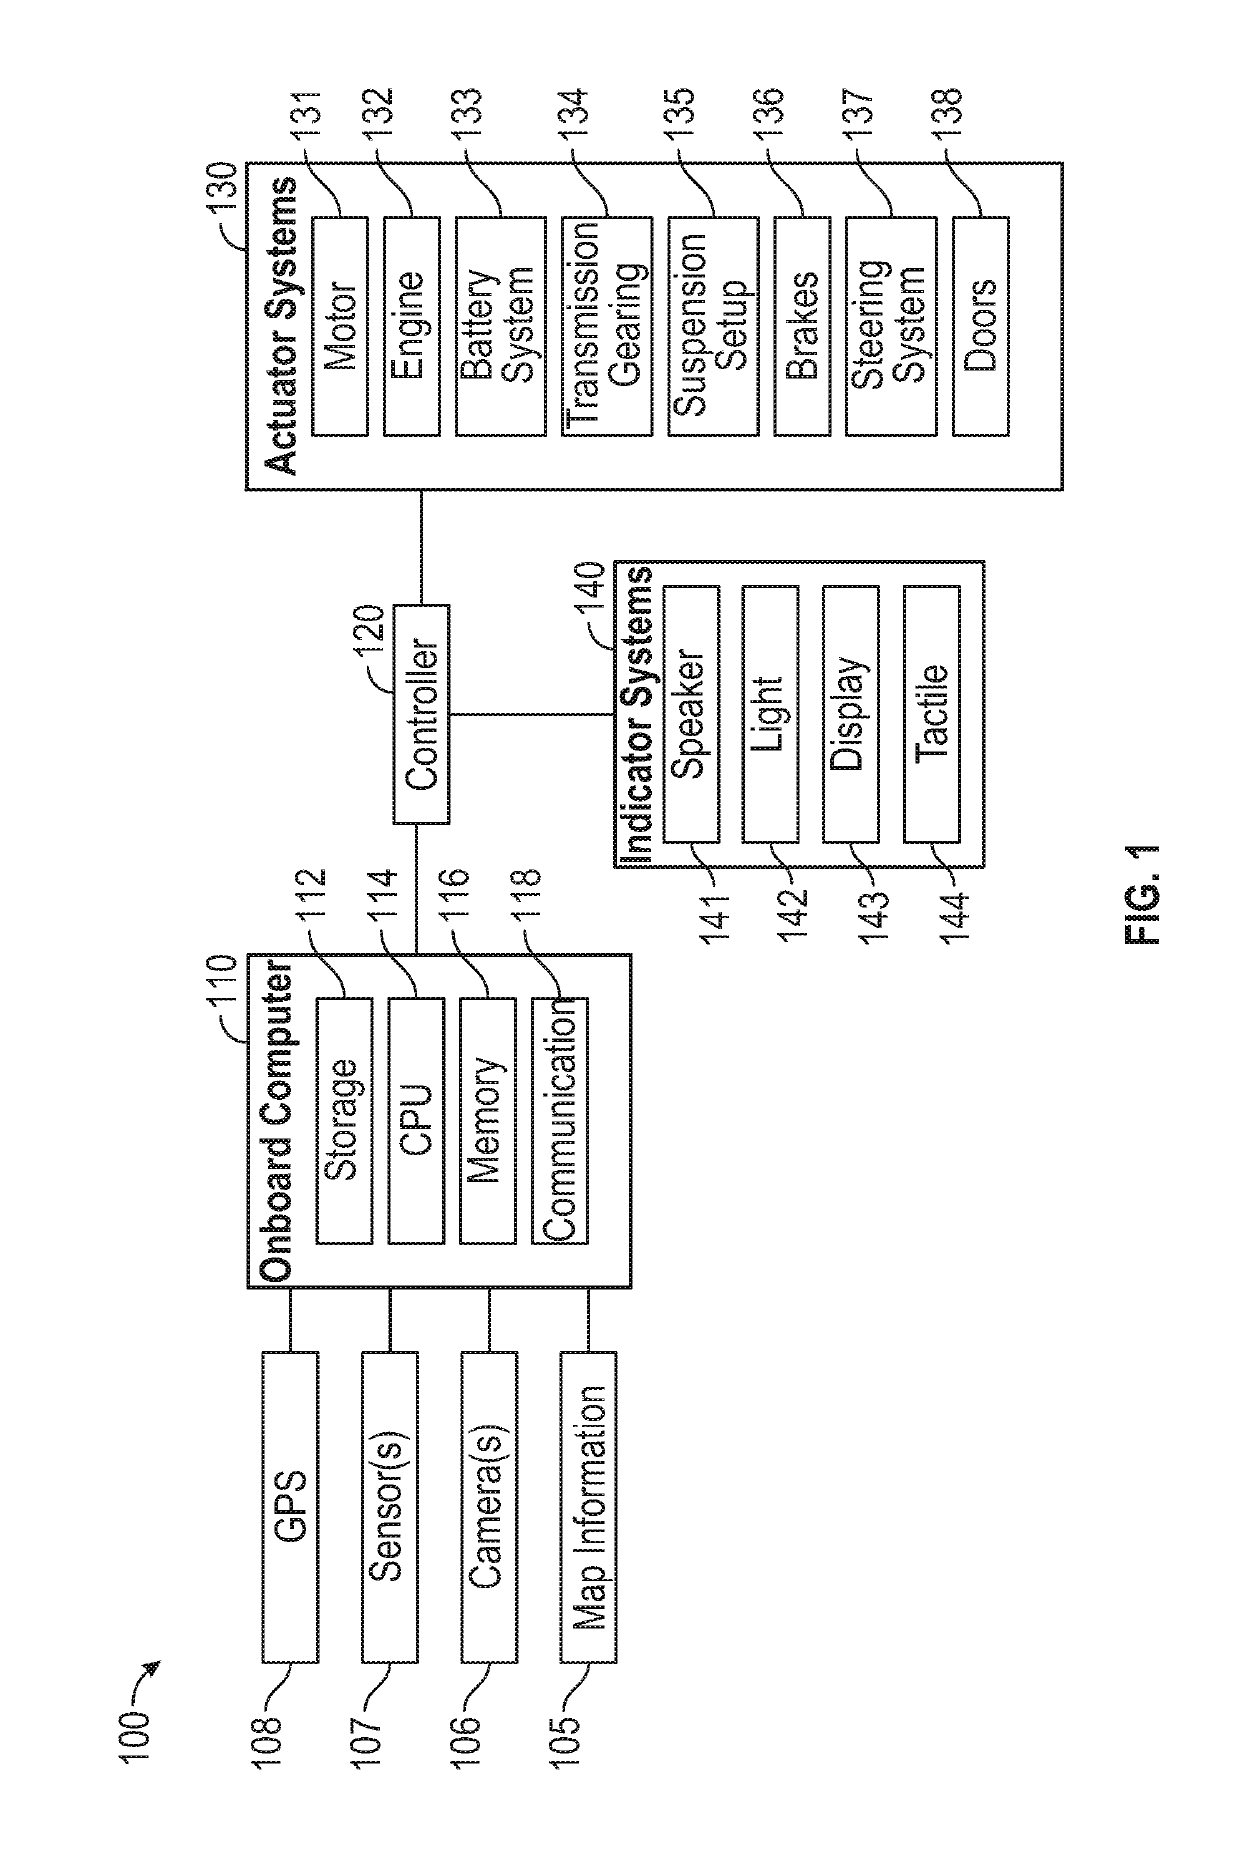 System and method for vehicular localization relating to autonomous navigation